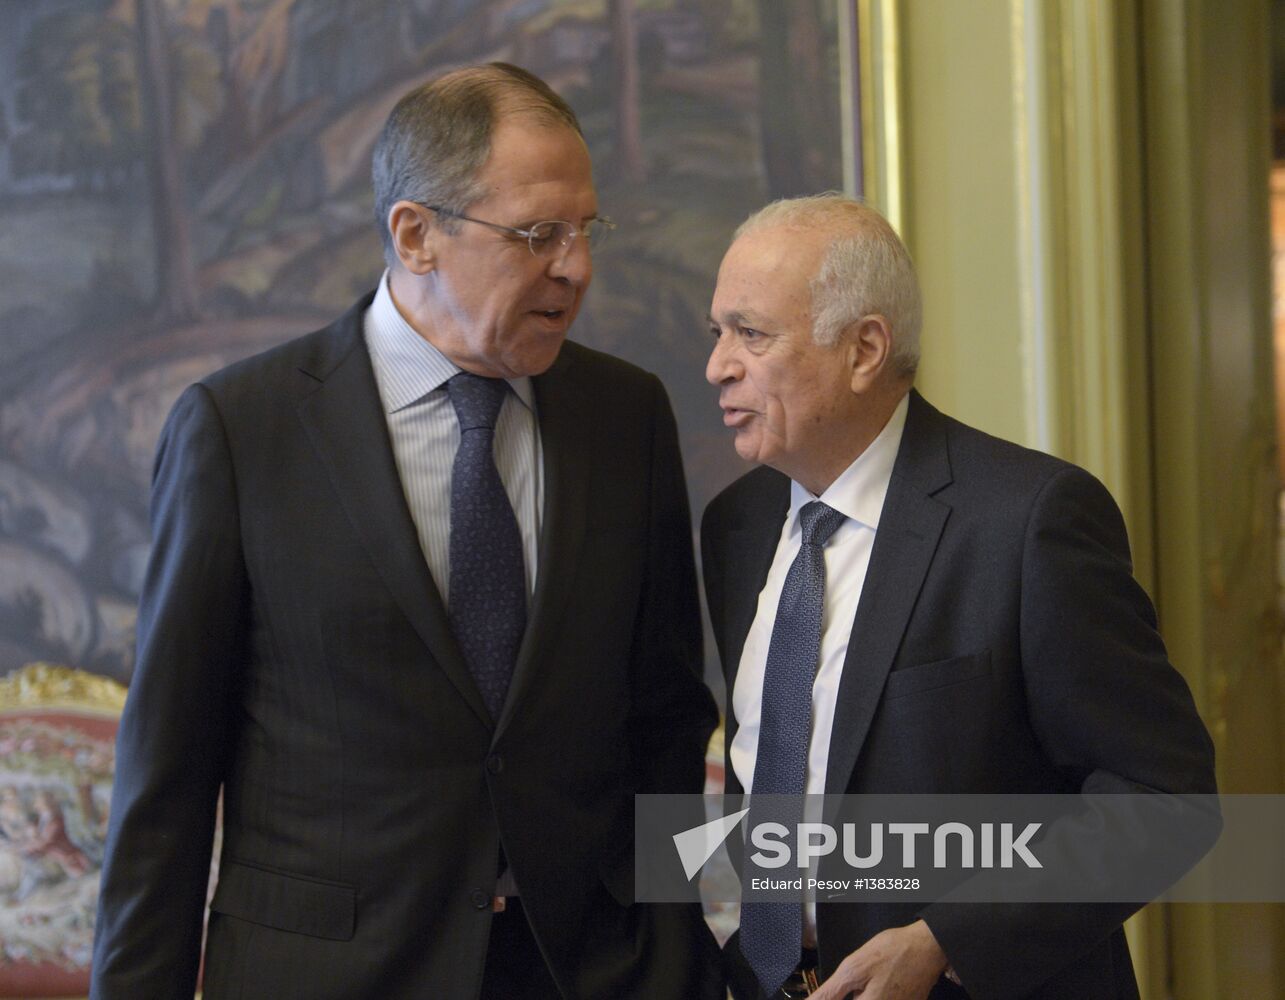 Sergei Lavrov meets with Arab League foreign ministers